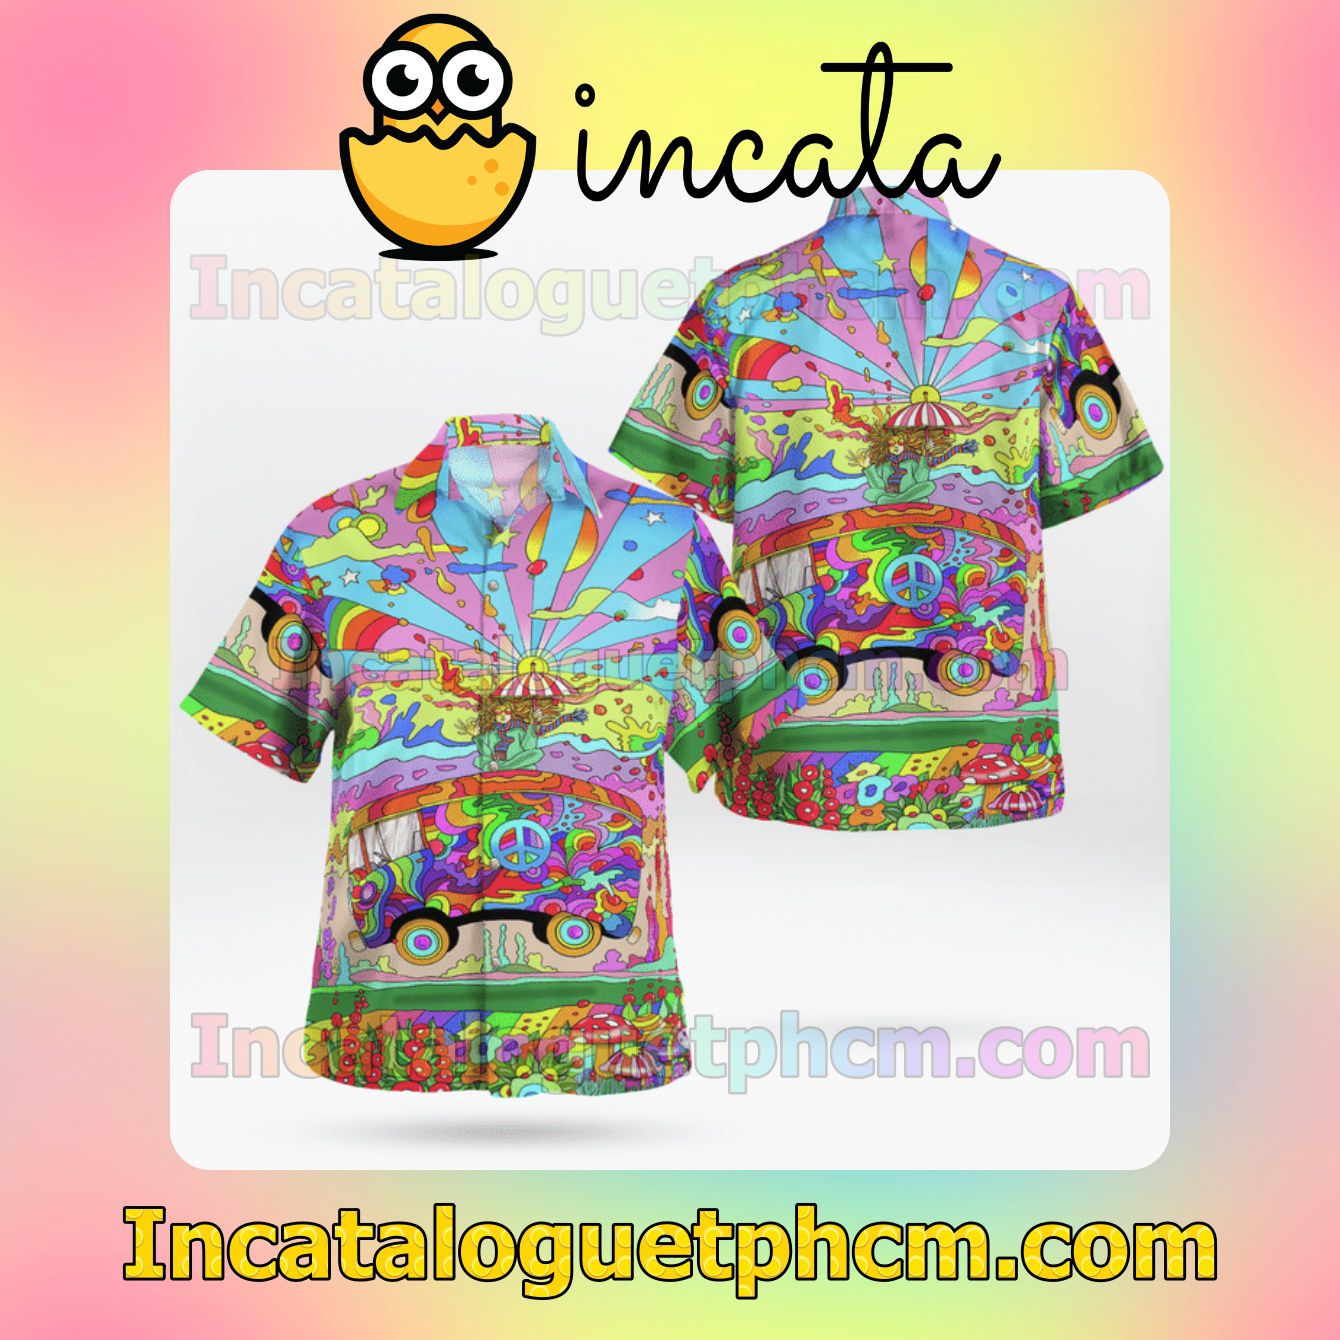 Let's Riding On Magic Hippie Bus Mens Short Sleeve Shirts